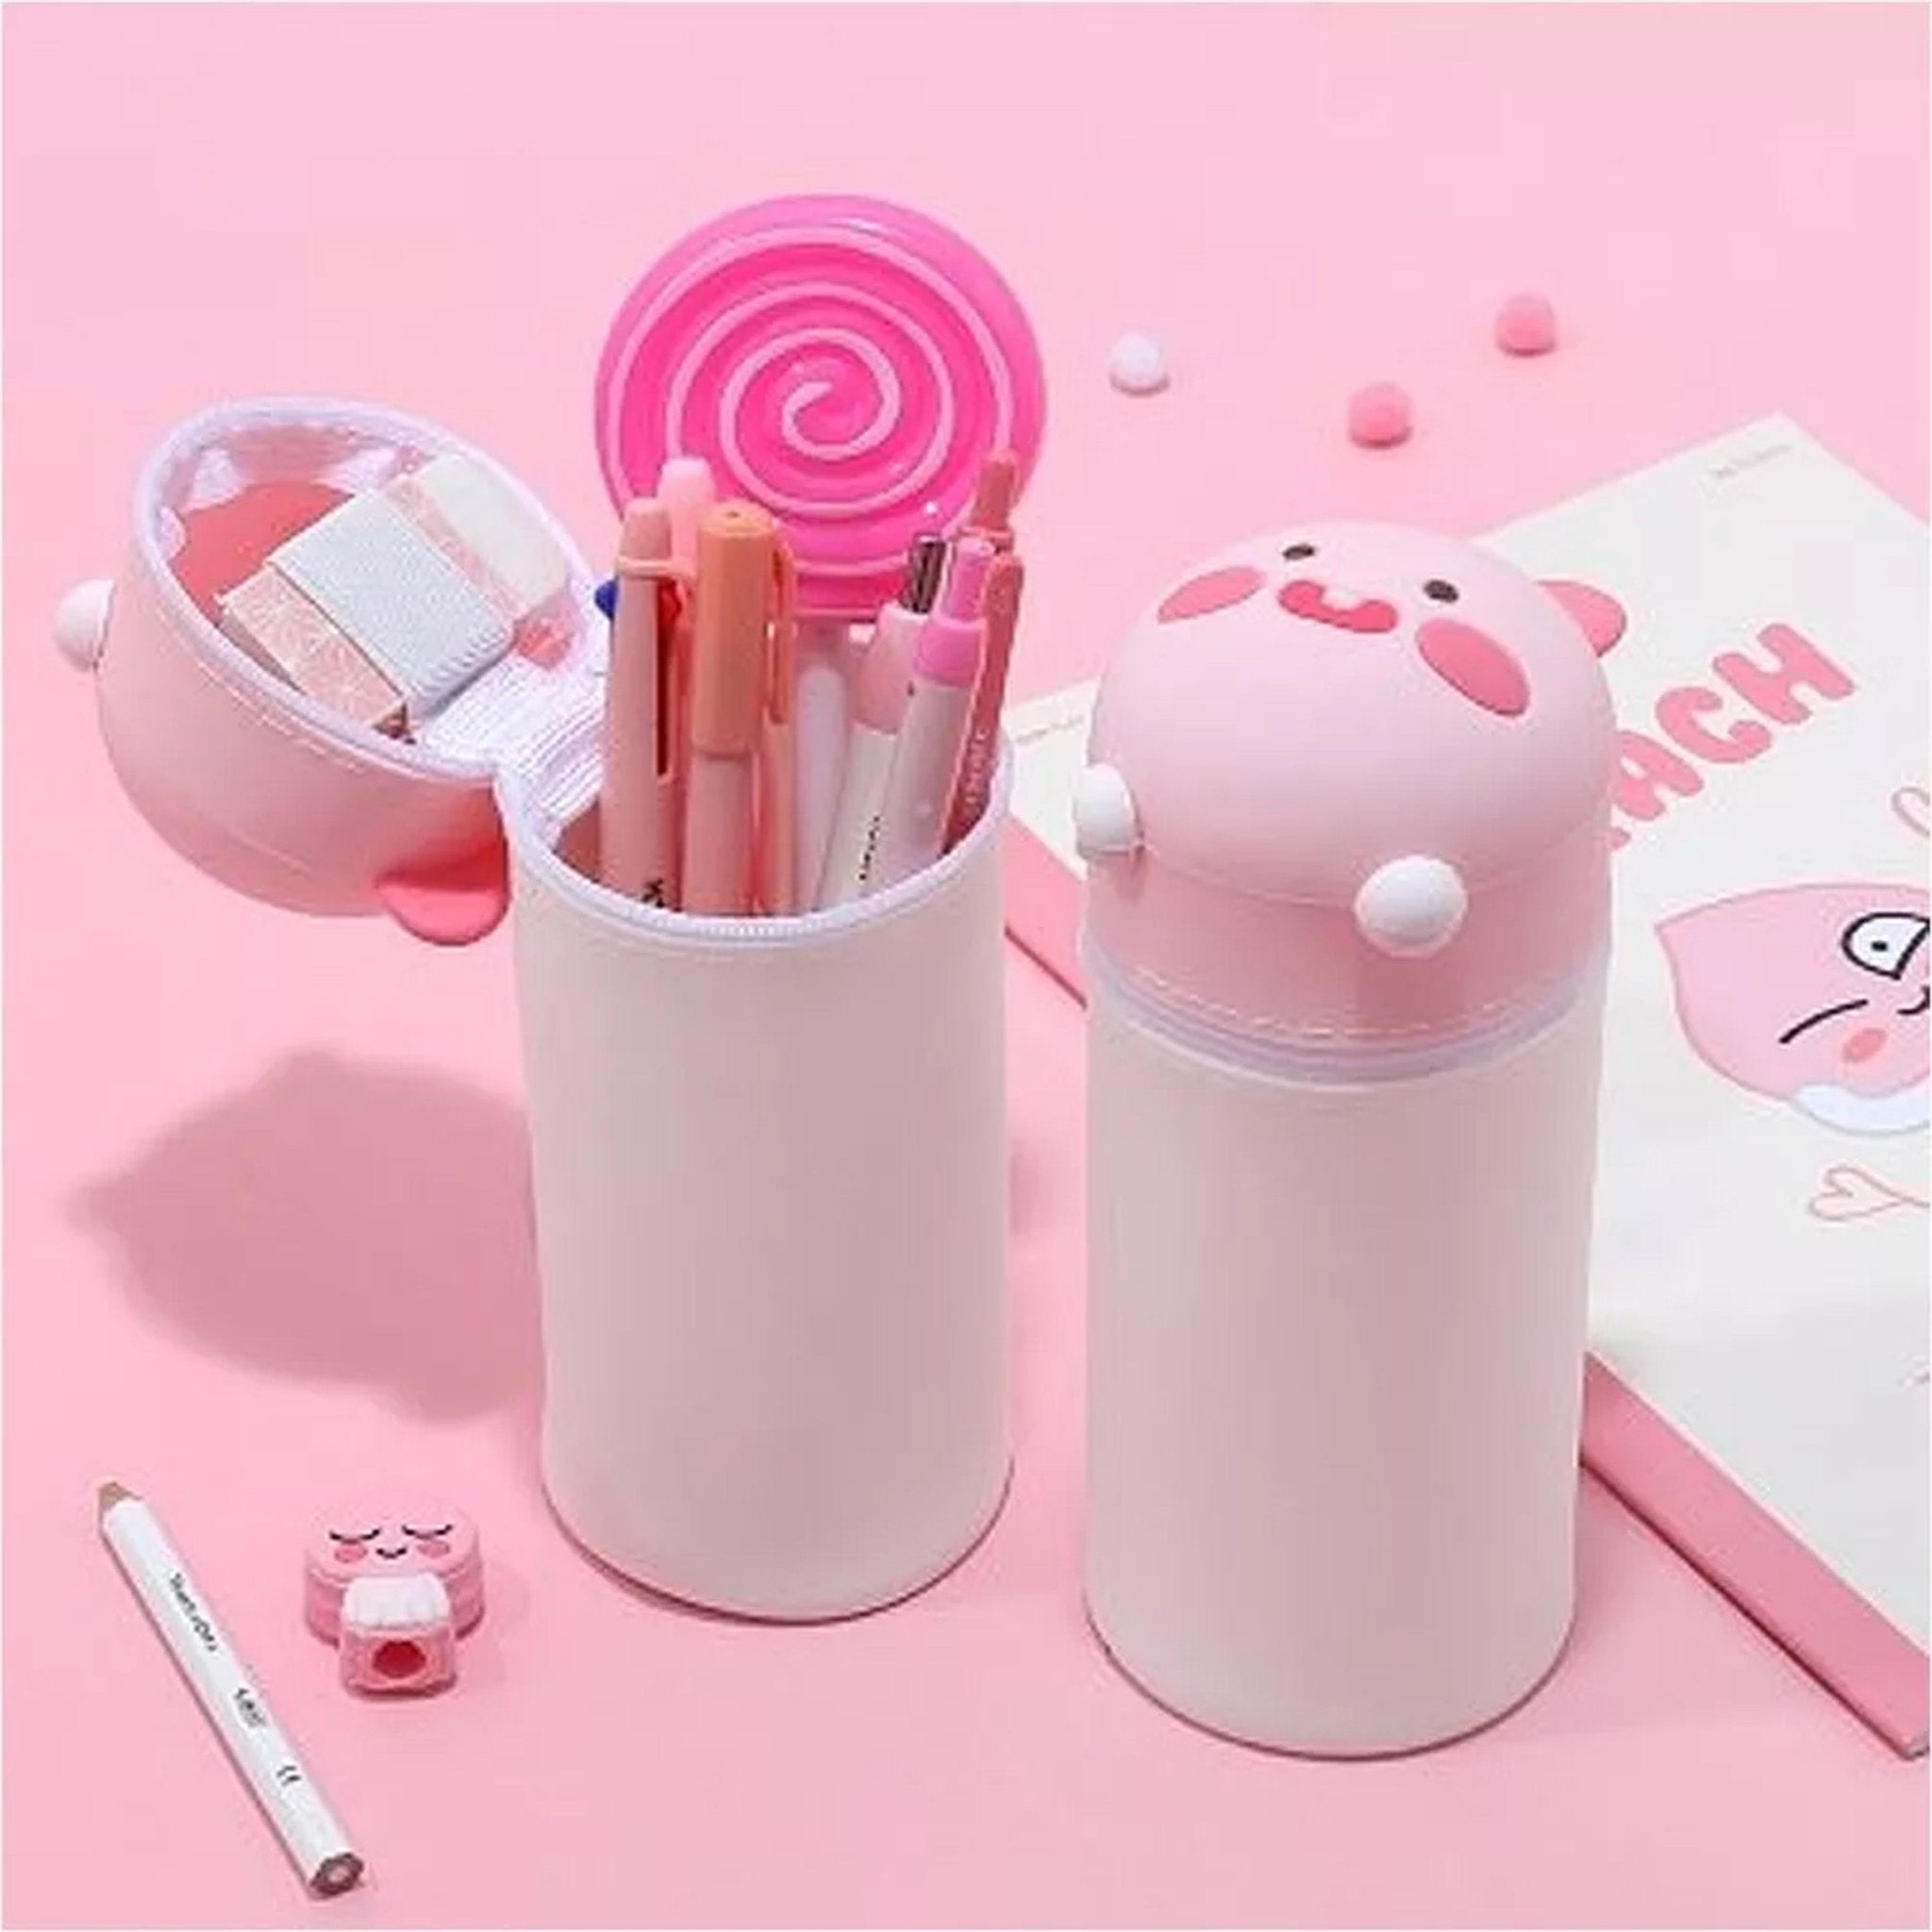 A Little Lovely Company Kids Pencil Case: Blossoms - Pink